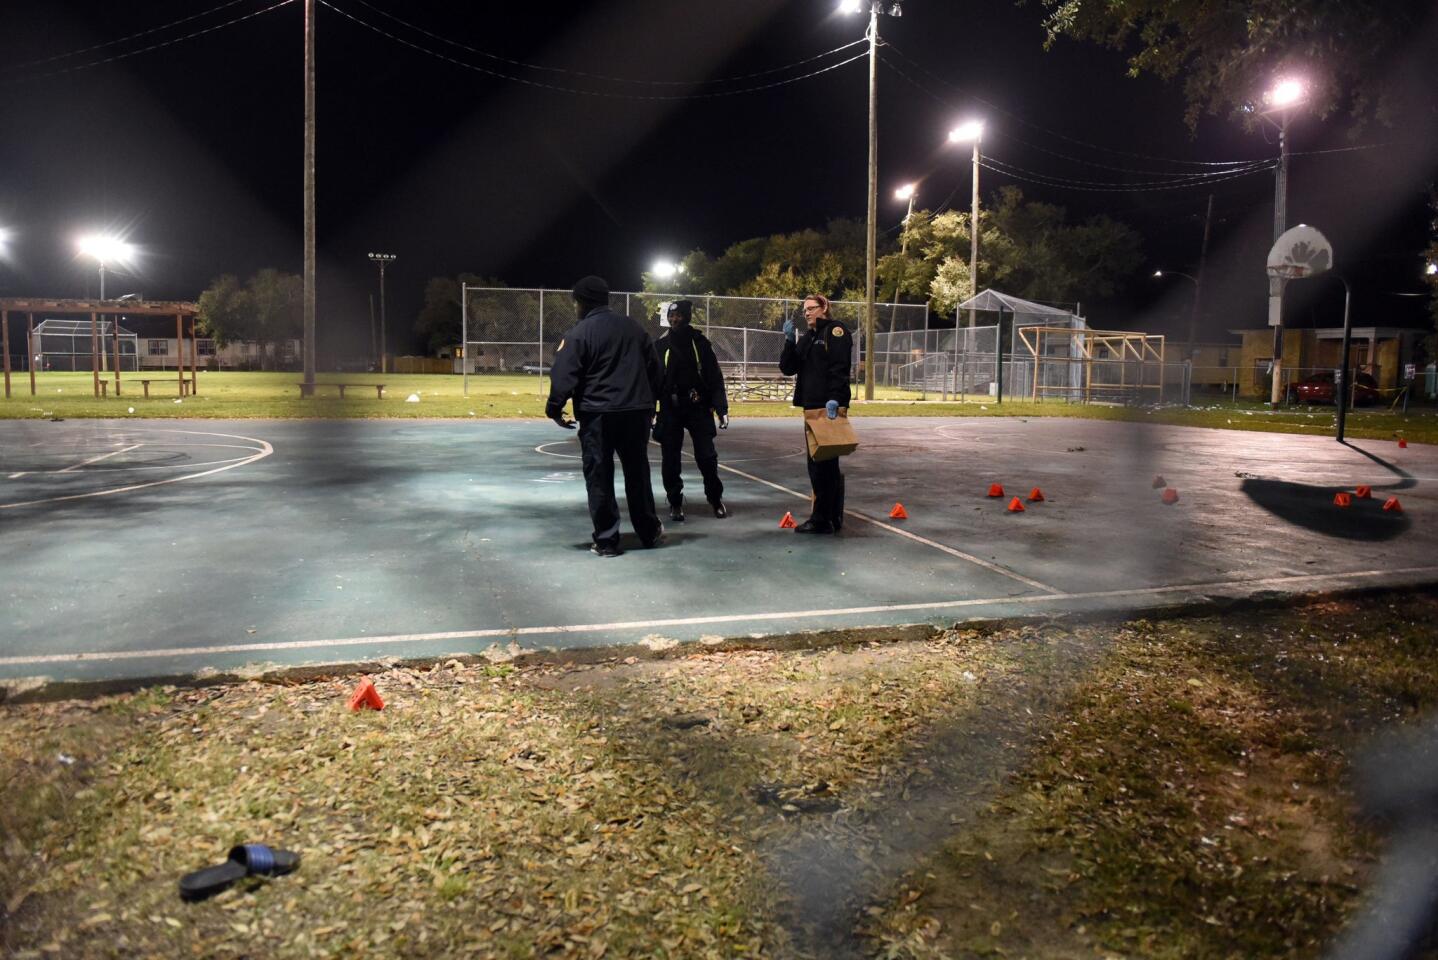 Police gather evidence after a shooting at a playground on November 22, 2015 in New Orleans, Louisiana.